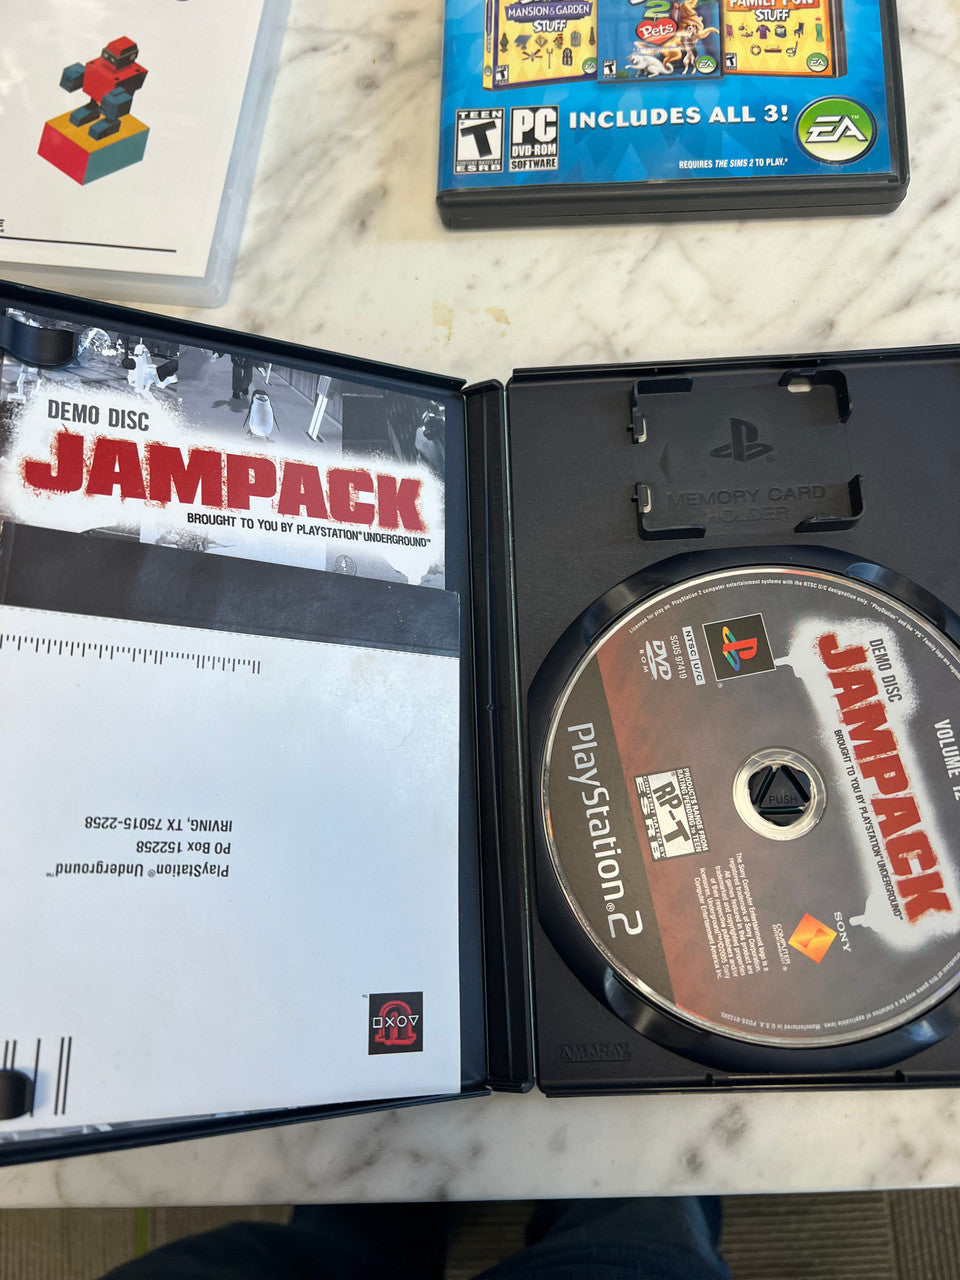 Jampack Vol. 12 RP-M Rating (Sony PlayStation 2, 2005) PS2 Demo disc